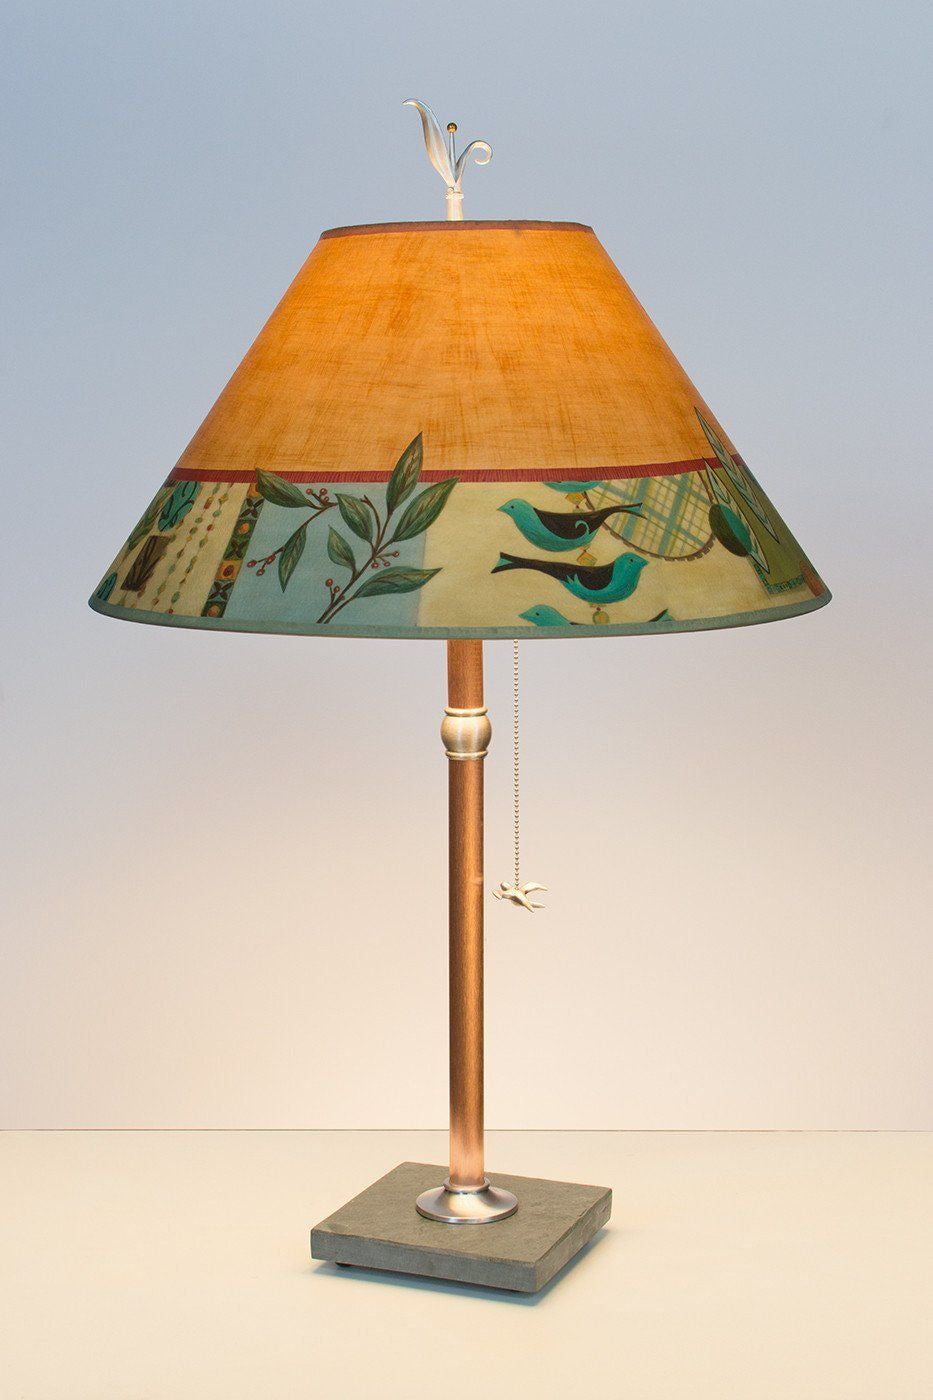 Janna Ugone &amp; Co Table Lamps Copper Table Lamp with Large Conical Shade in New Capri Spice